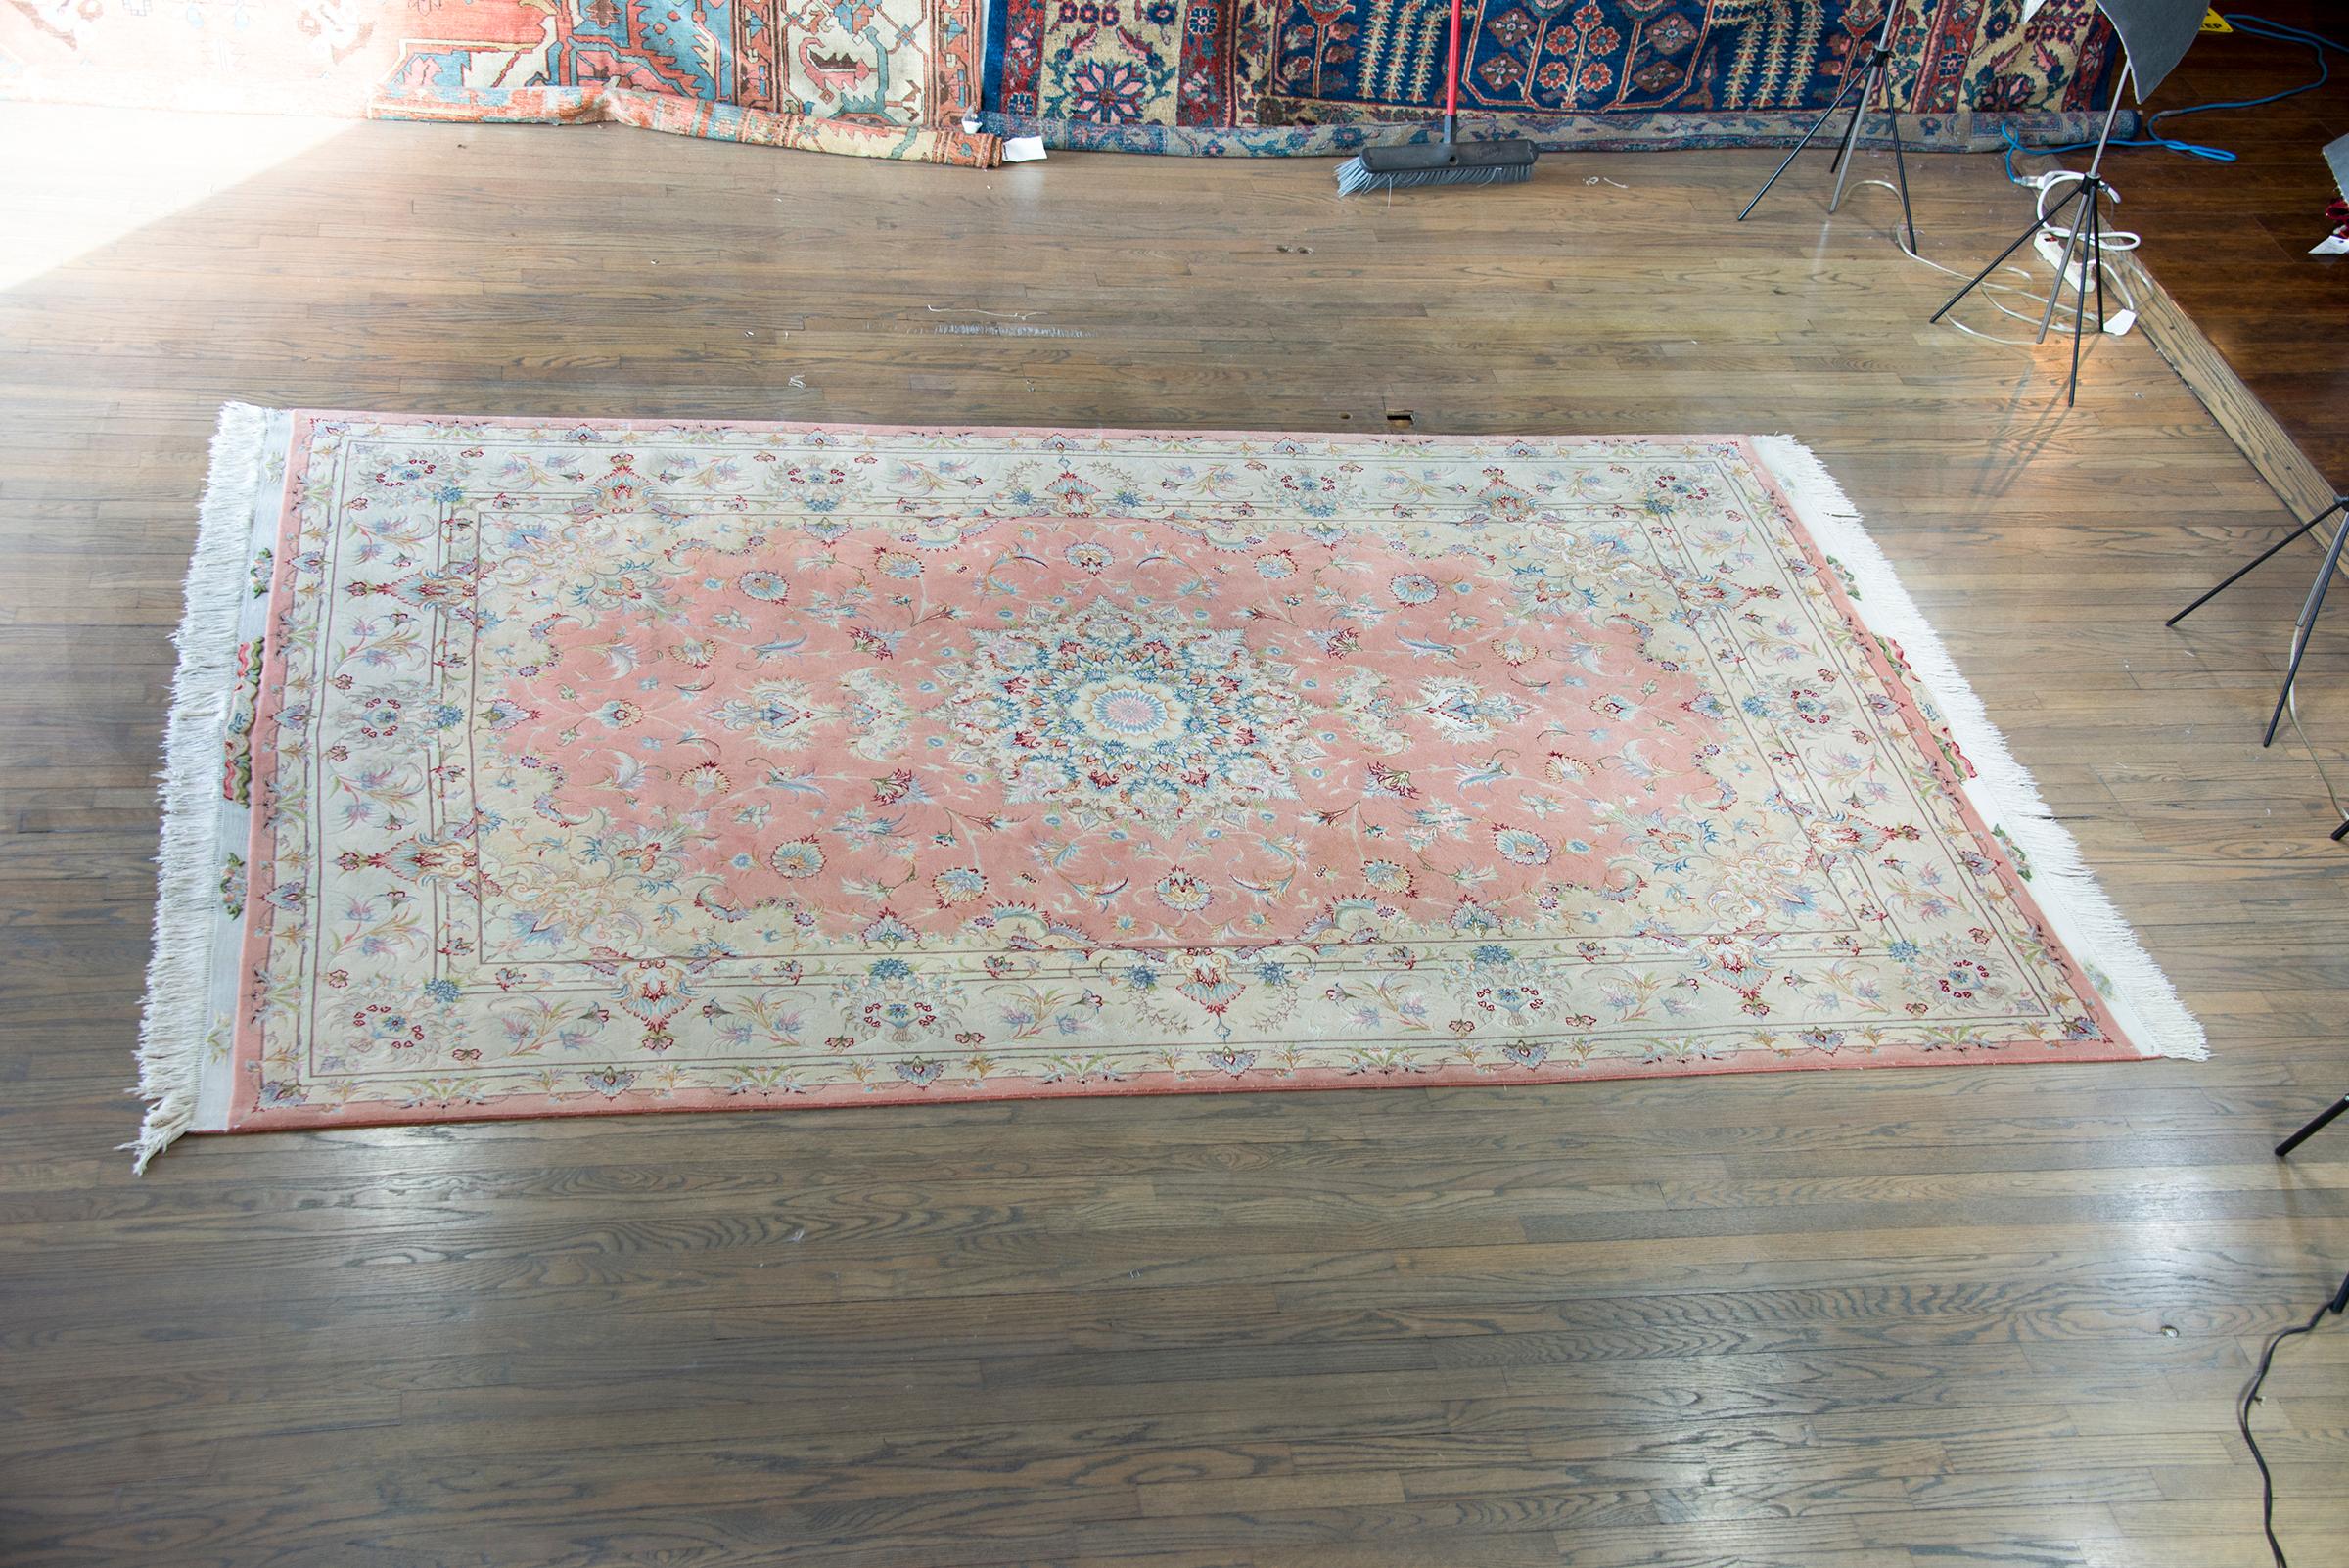 A remarkable late 20th century Persian Tabriz hand-knotted silk and wool rug with a mesmerizing pattern with a central medallion living amidst a finely rendered field of scrolling vines and flowers, and surrounded by a wide large-scale repeated